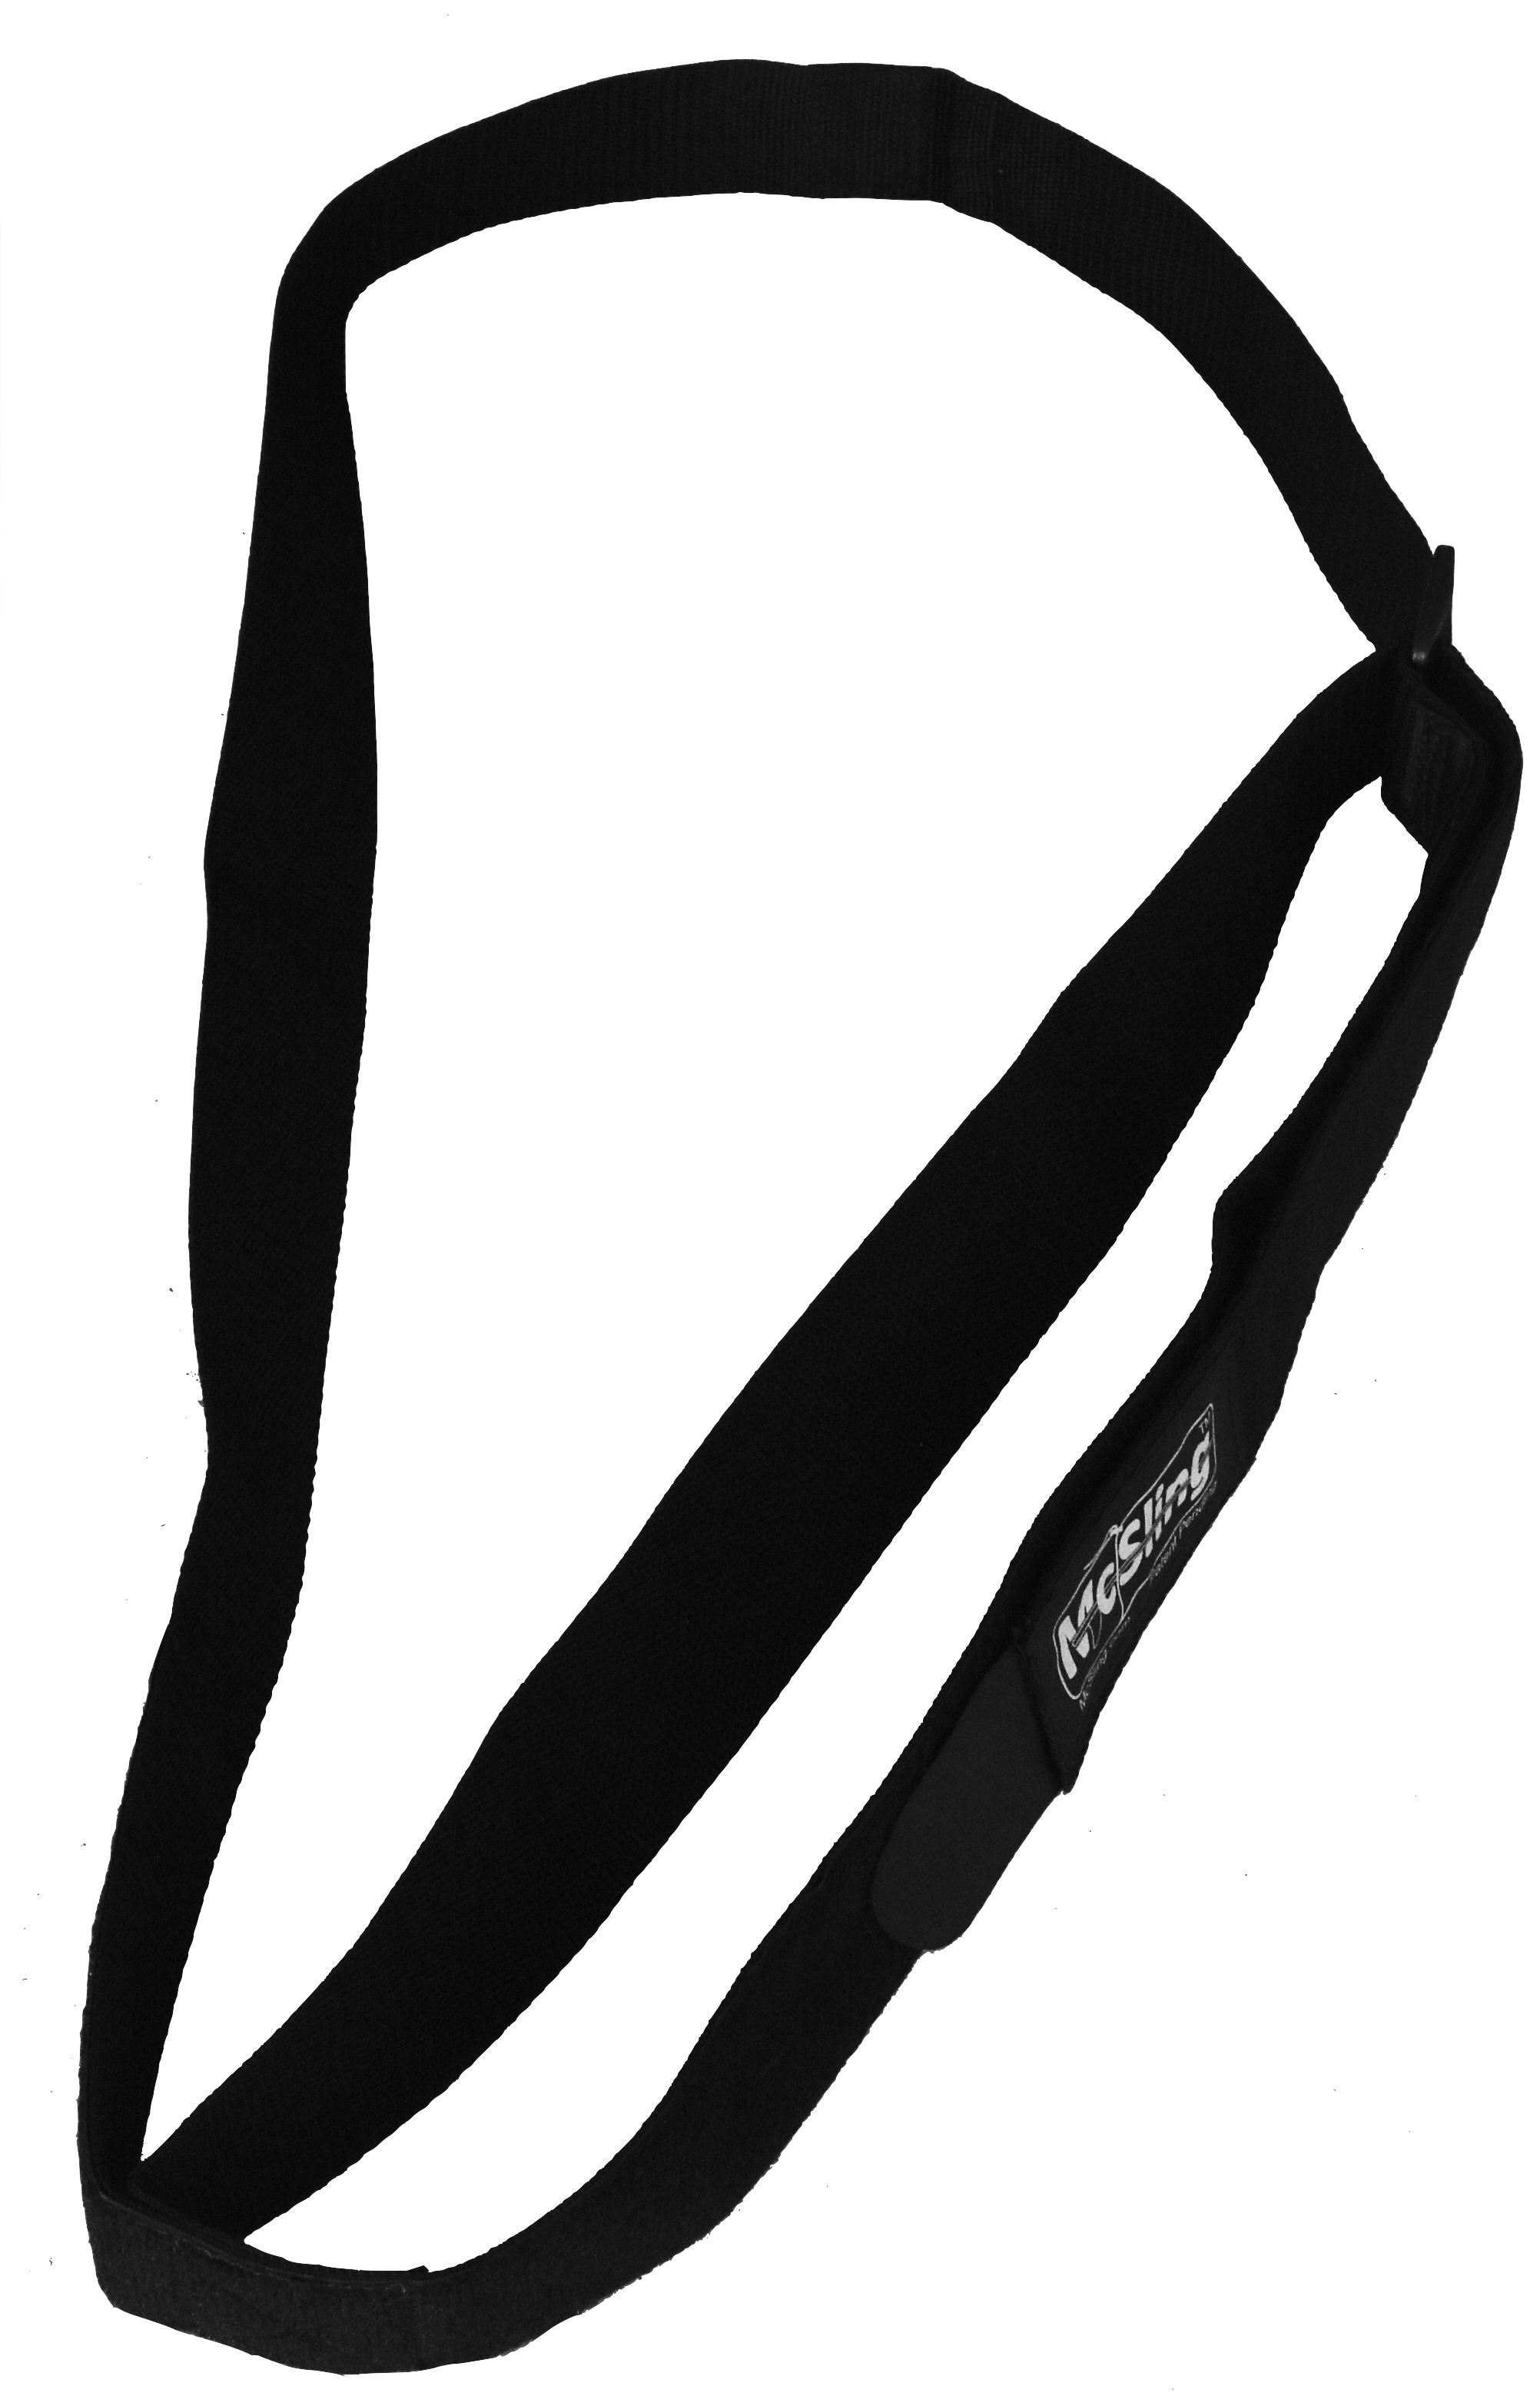 McSling4Surf is a black color surfboard carry strap, a surfboard carrier, that only needs to wrap around the board once